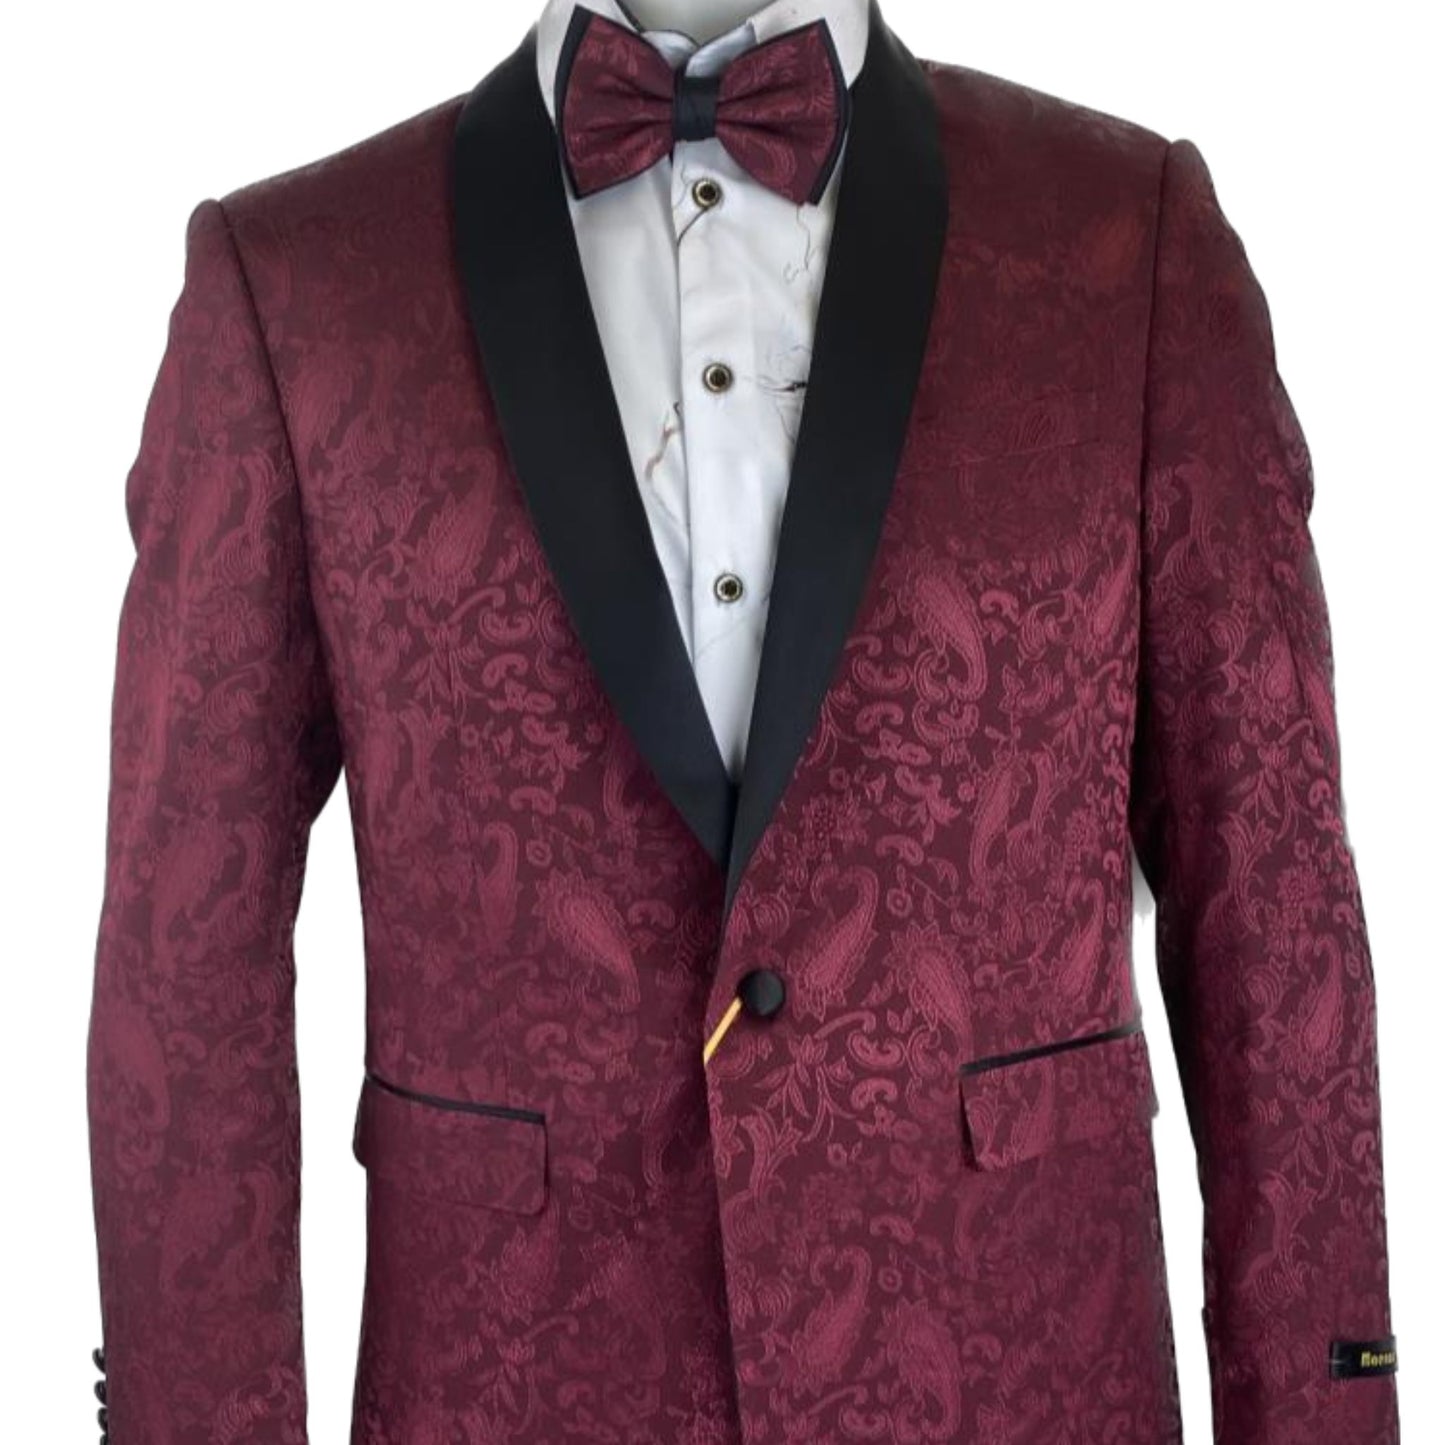 KCT Menswear's Burgundy Paisley with Black Shawl Lapel Prom Blazer and Matching Bowtie, showcasing an elegant and captivating look for any formal occasion.